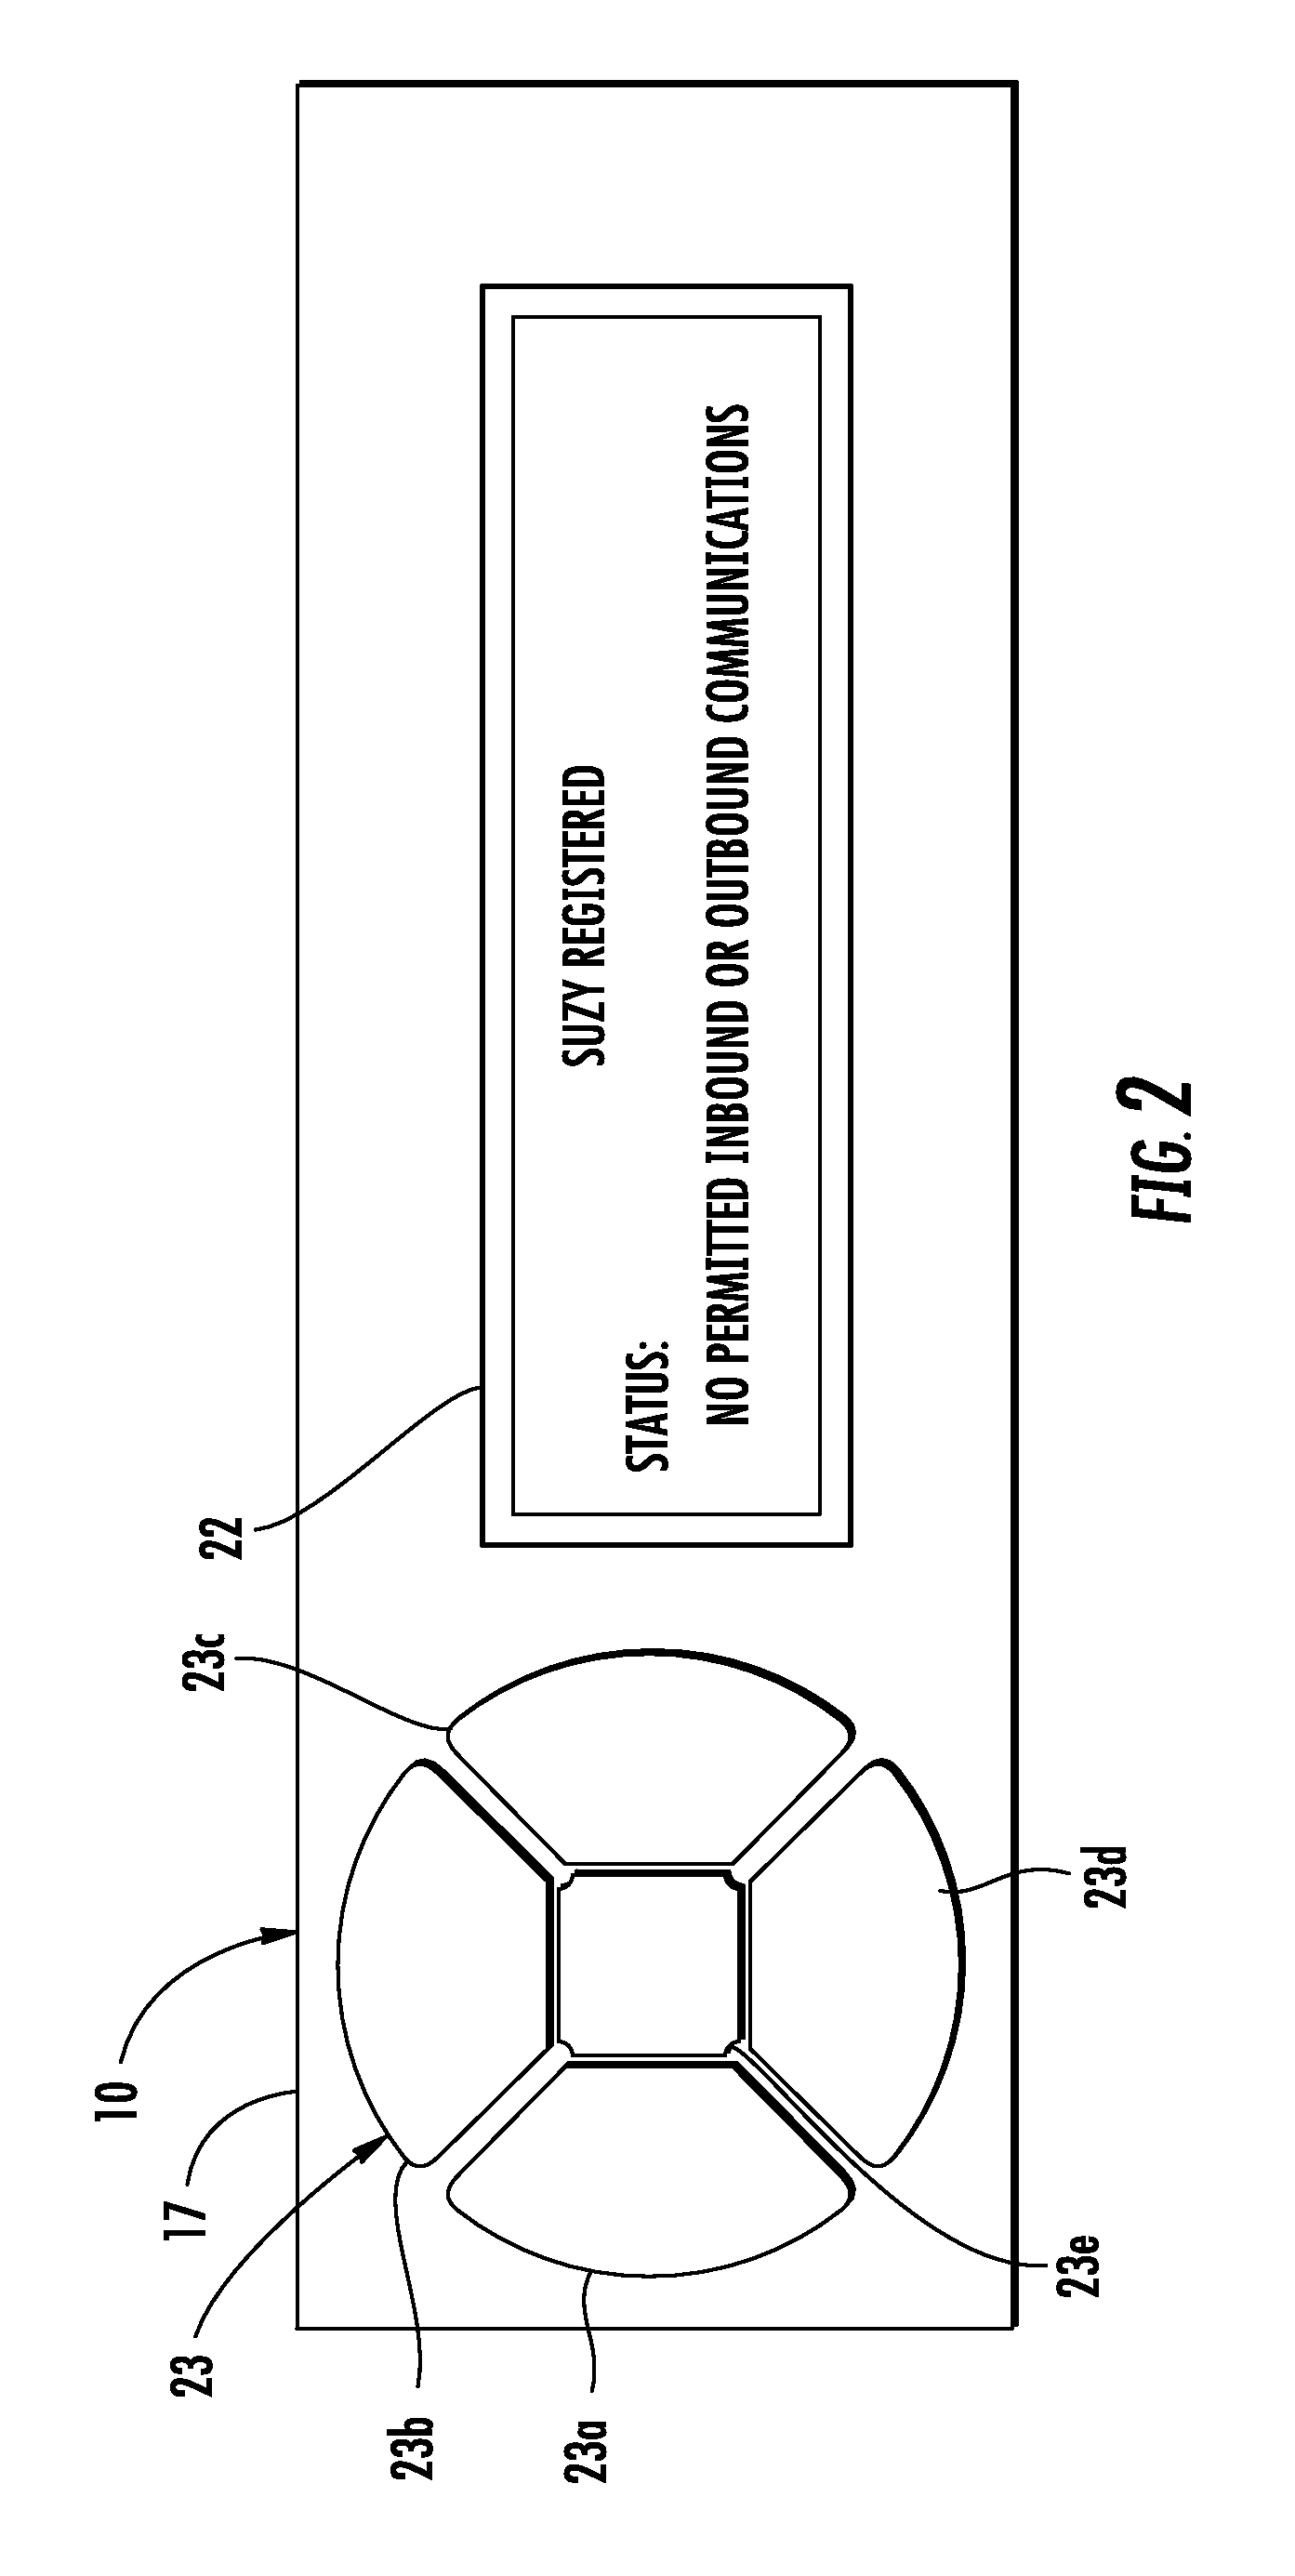 Mobile wireless communications device blocker and associated methods